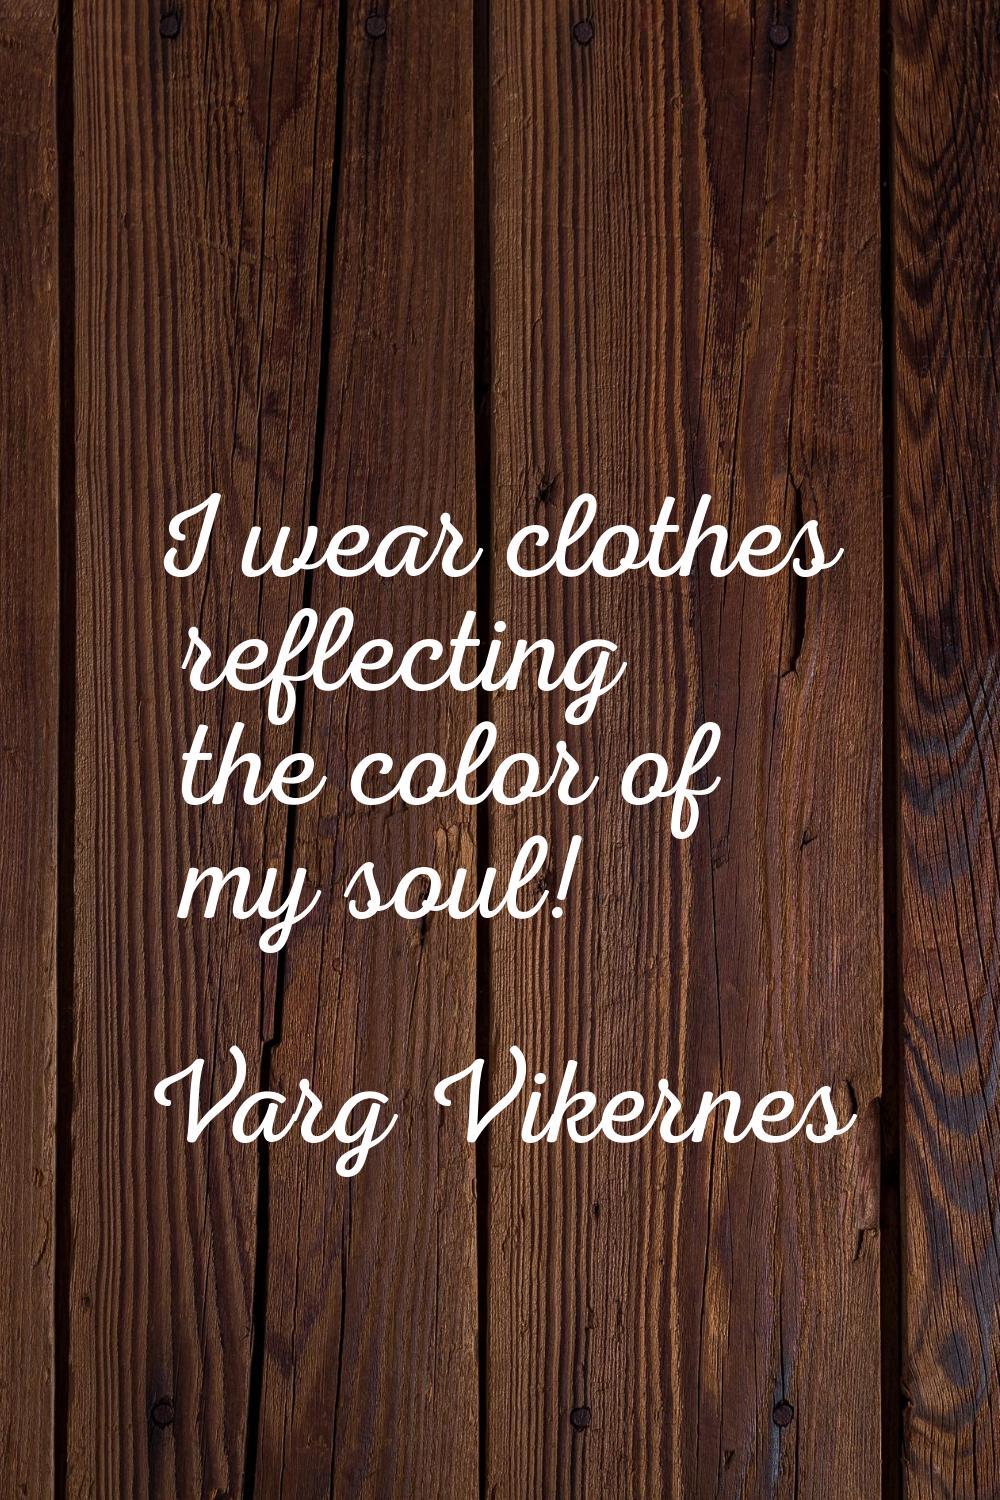 I wear clothes reflecting the color of my soul!